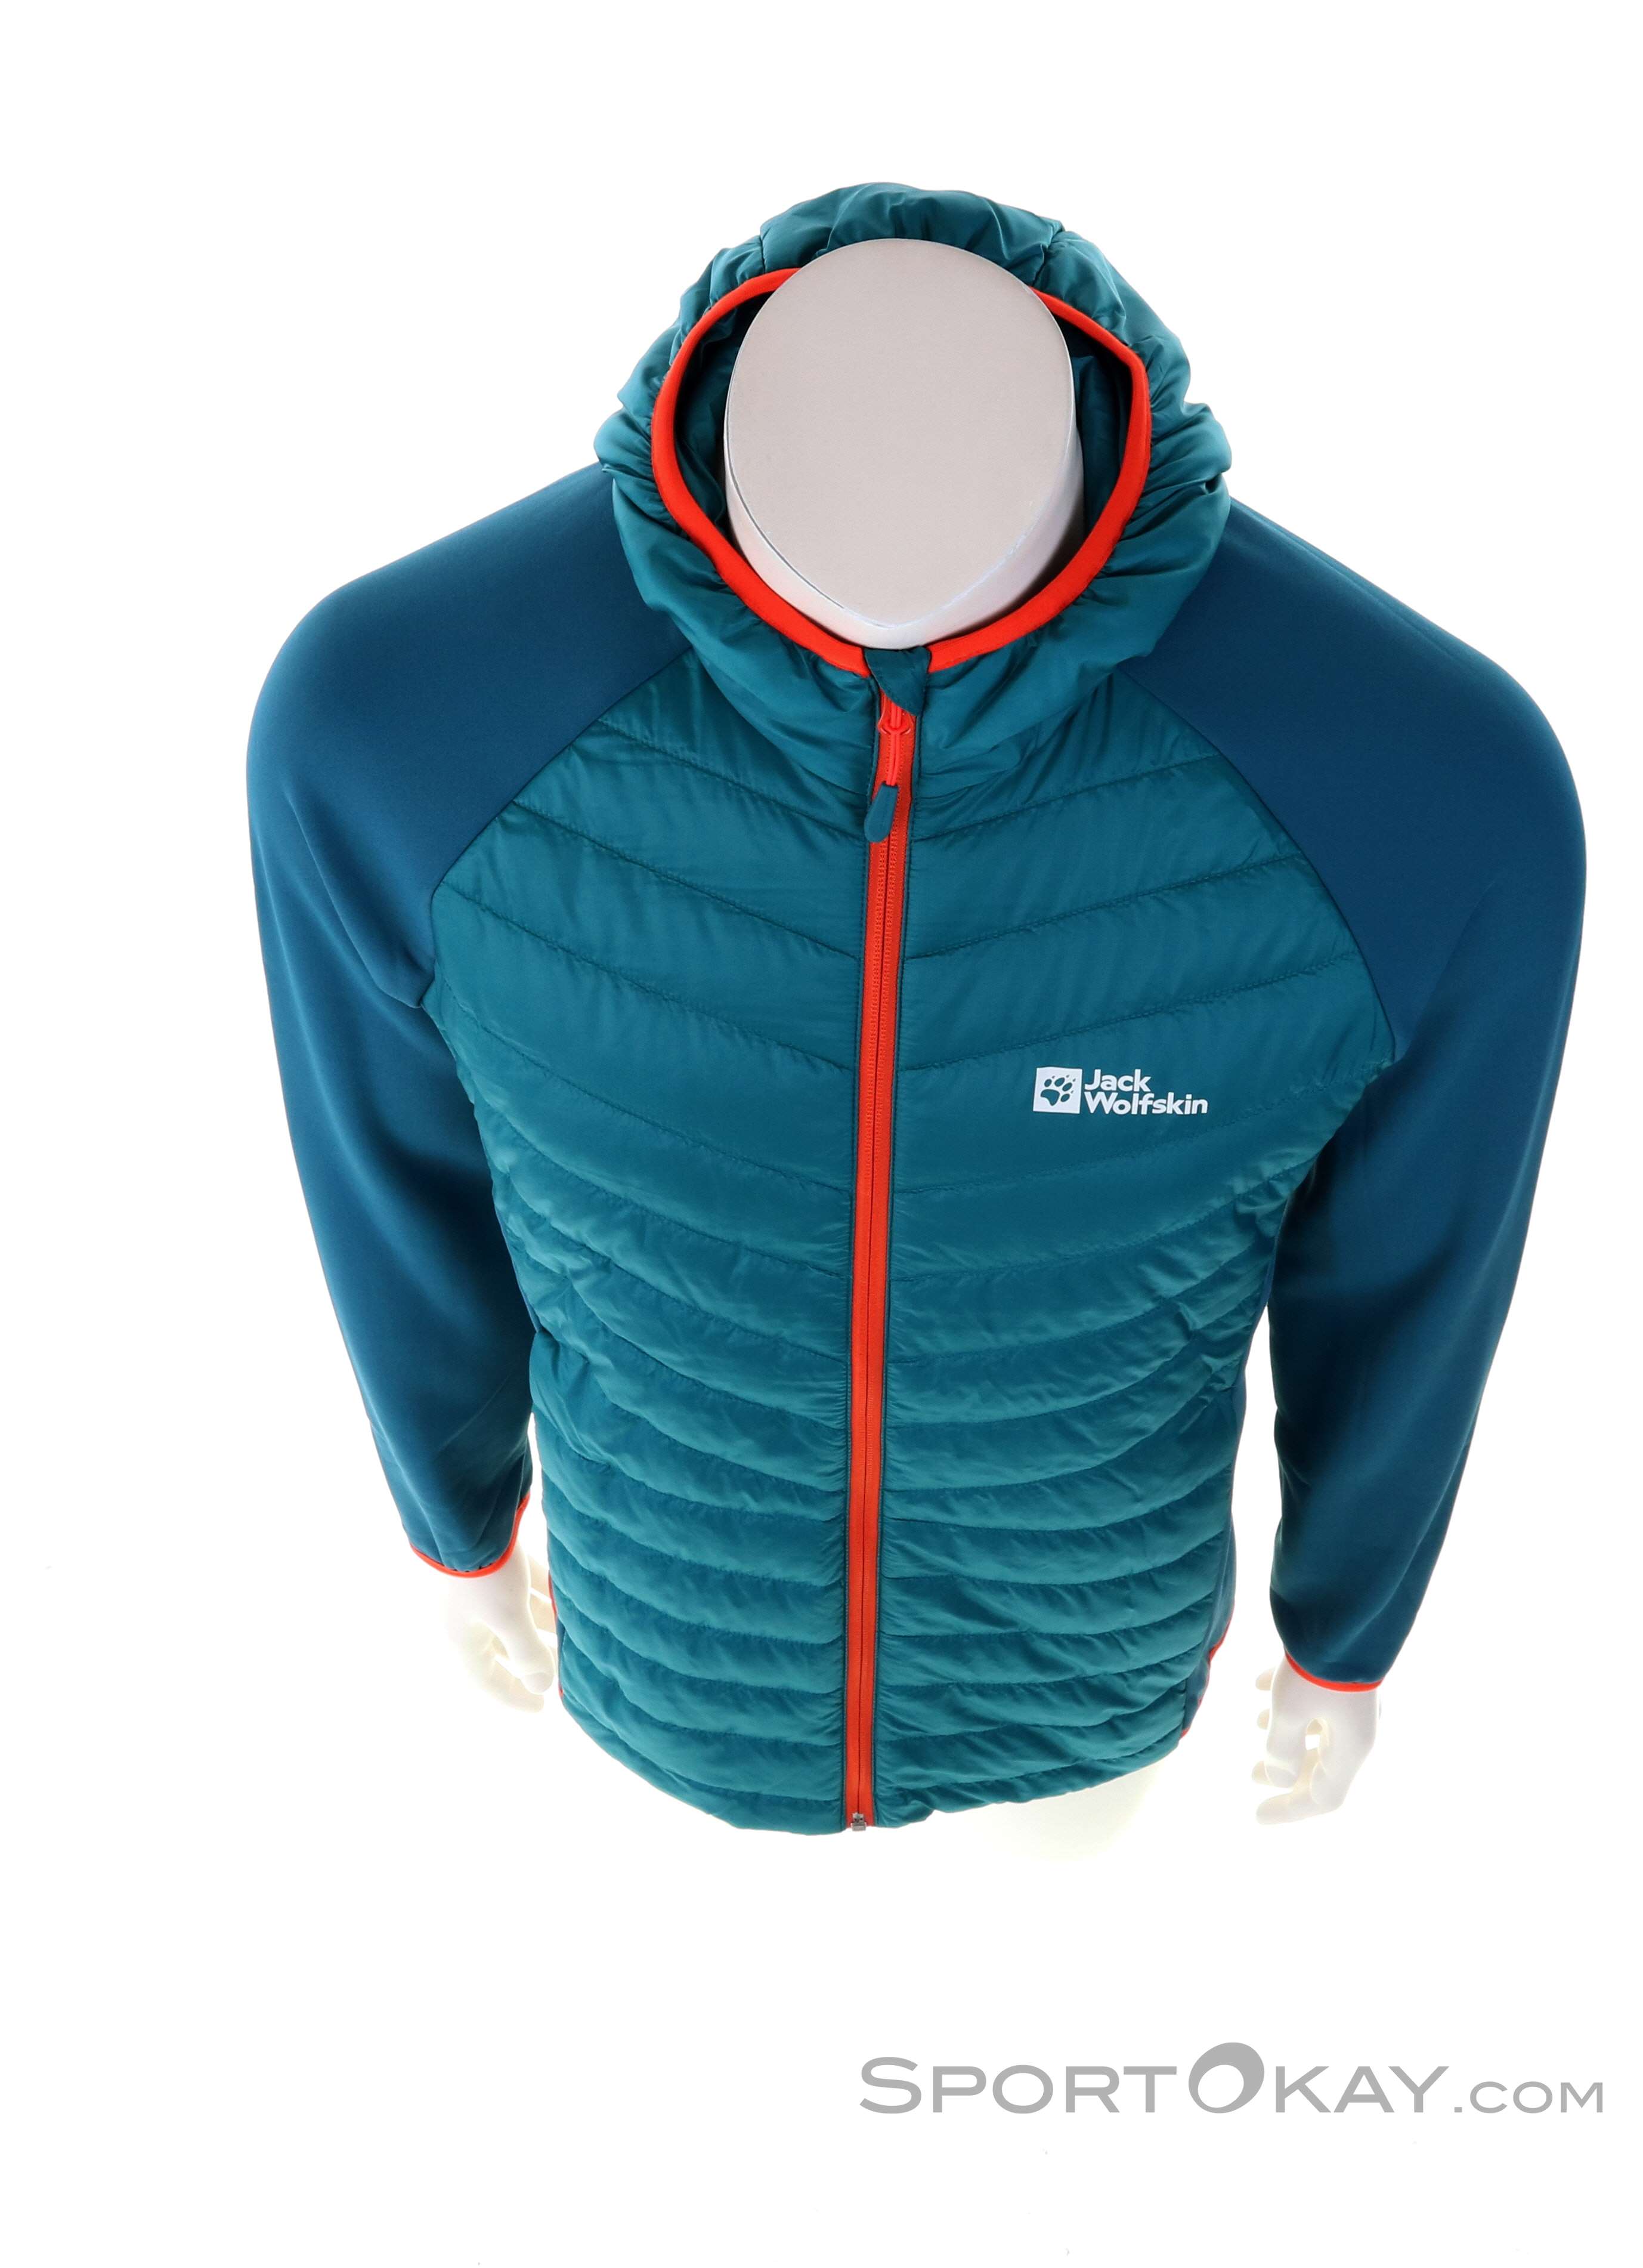 - All Clothing Jackets Mens Pro Jacket Outdoor Outdoor - Hybrid - Jack Wolfskin Outdoor - Routeburn